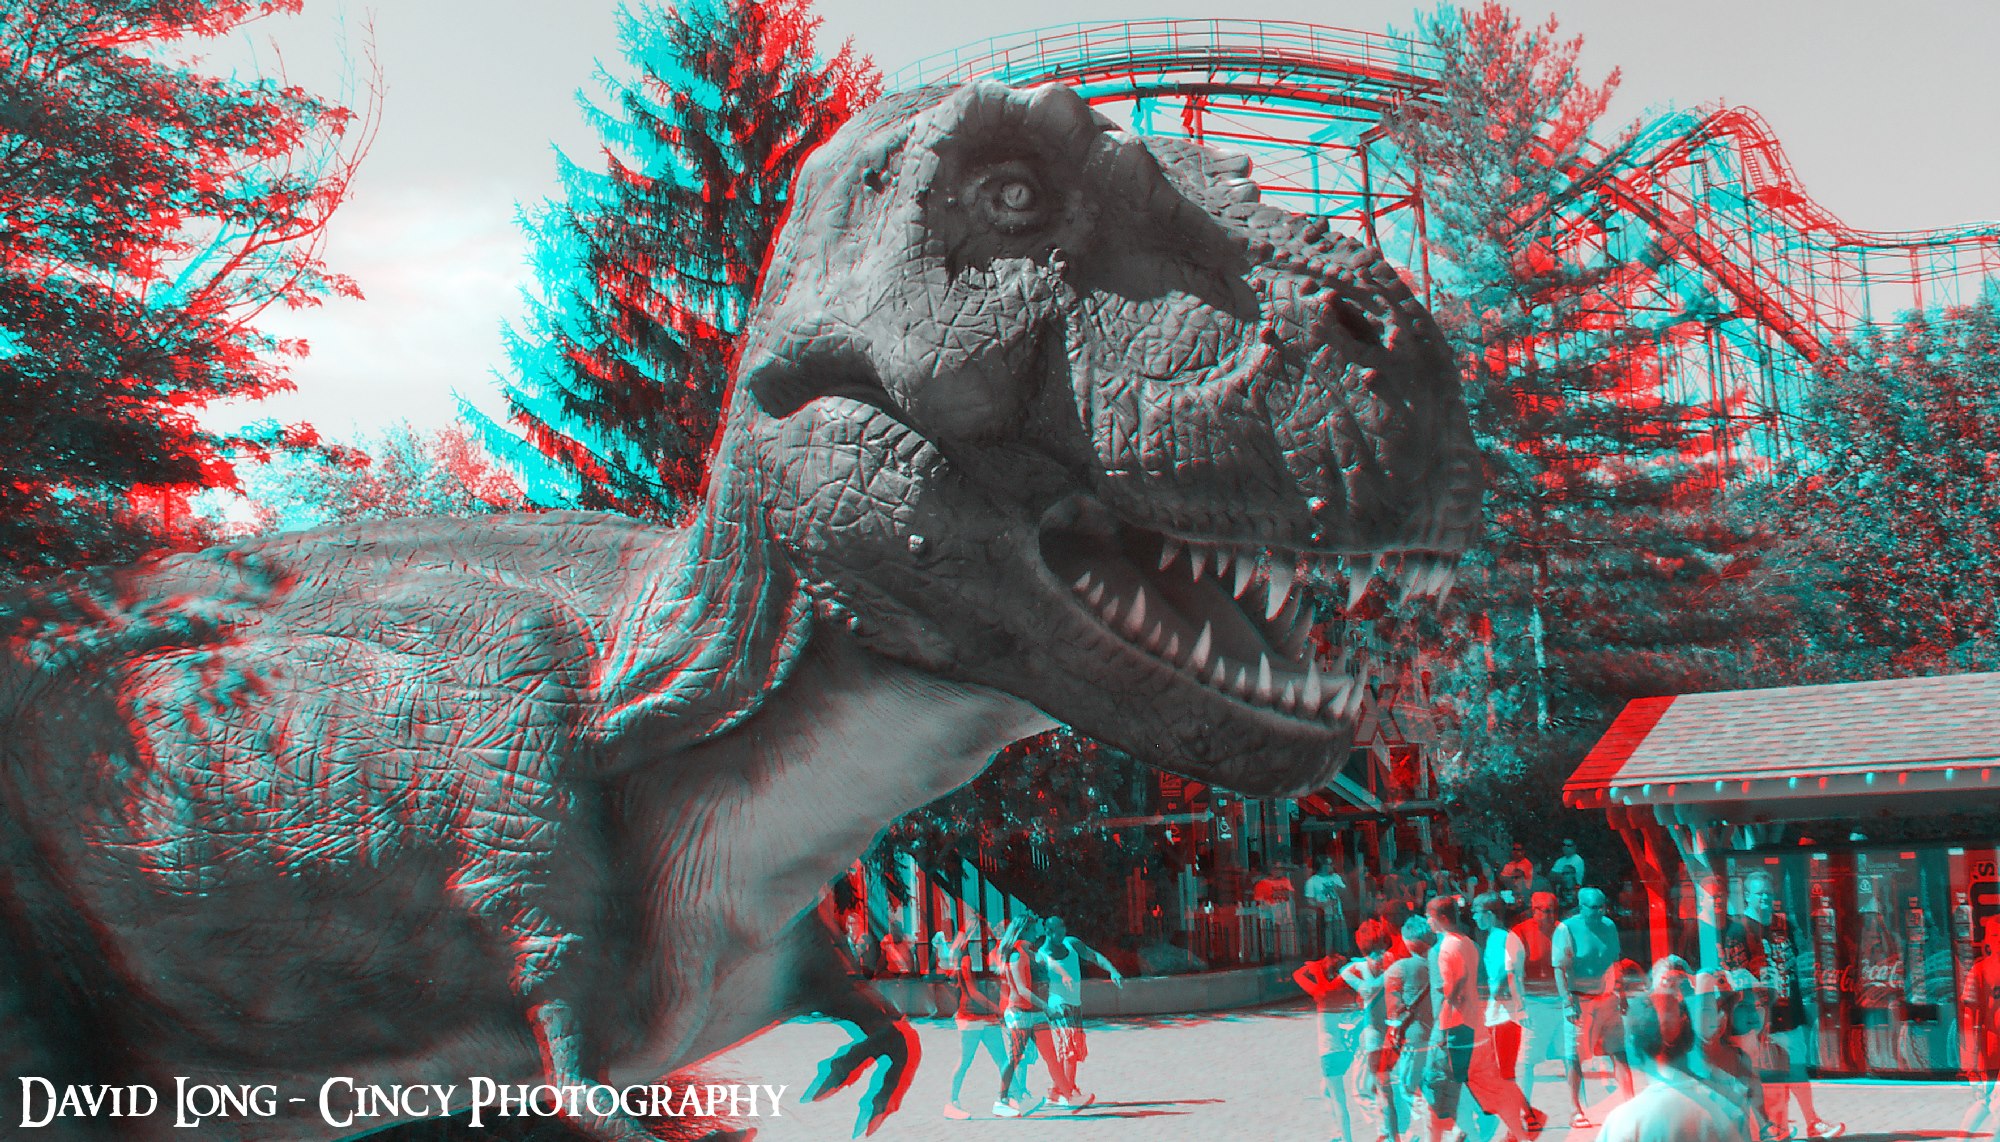 3D Photos Anaglyph Stereoscopic Images by Cincy Photography